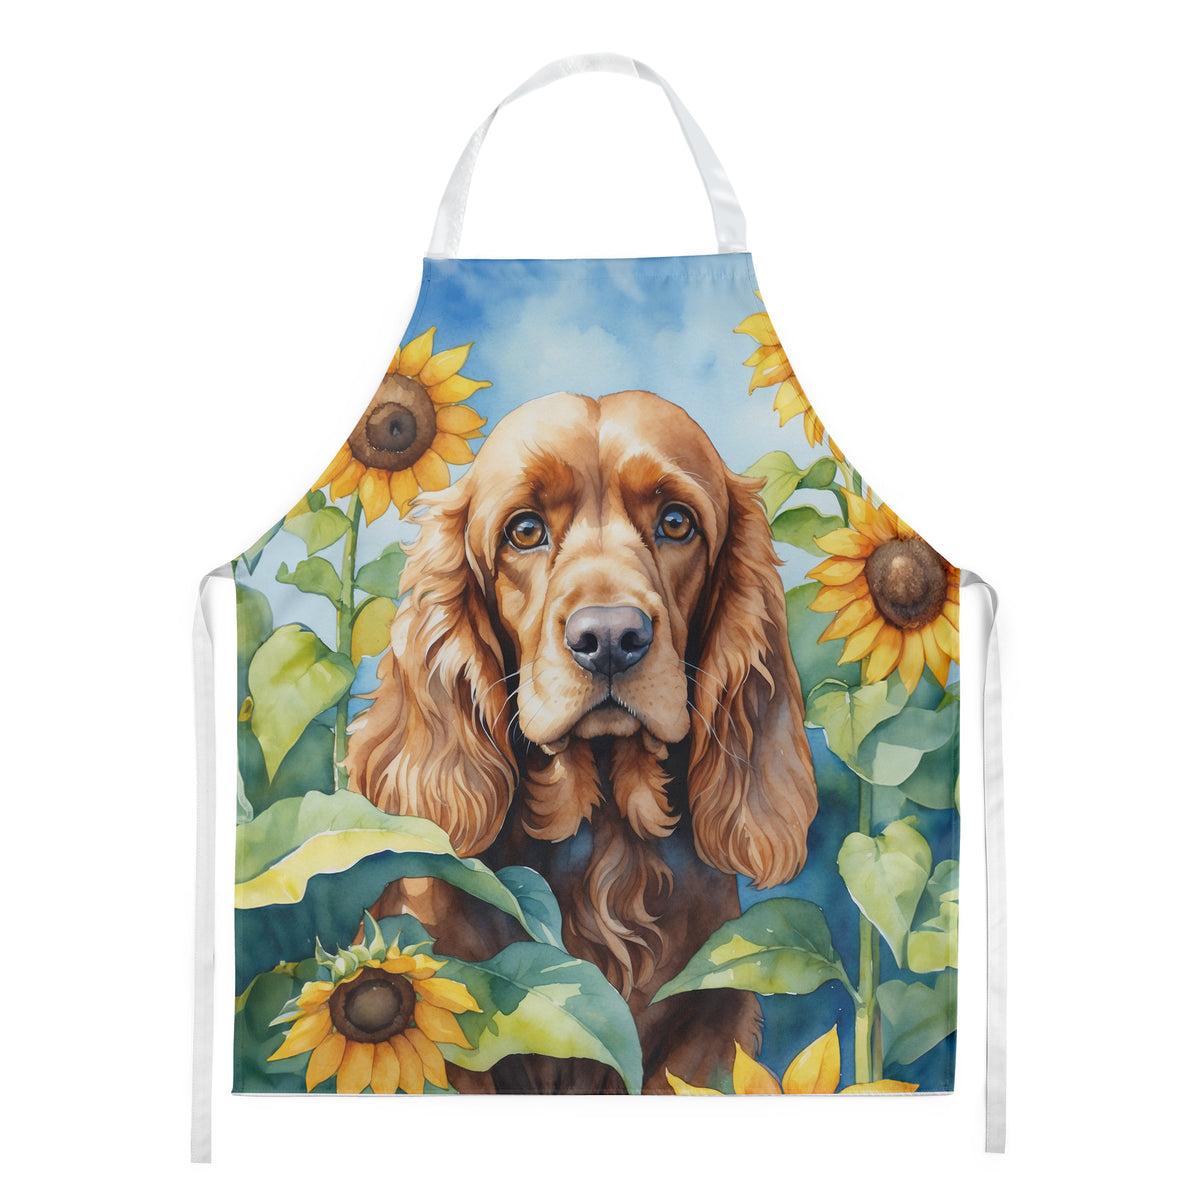 Buy this Cocker Spaniel in Sunflowers Apron